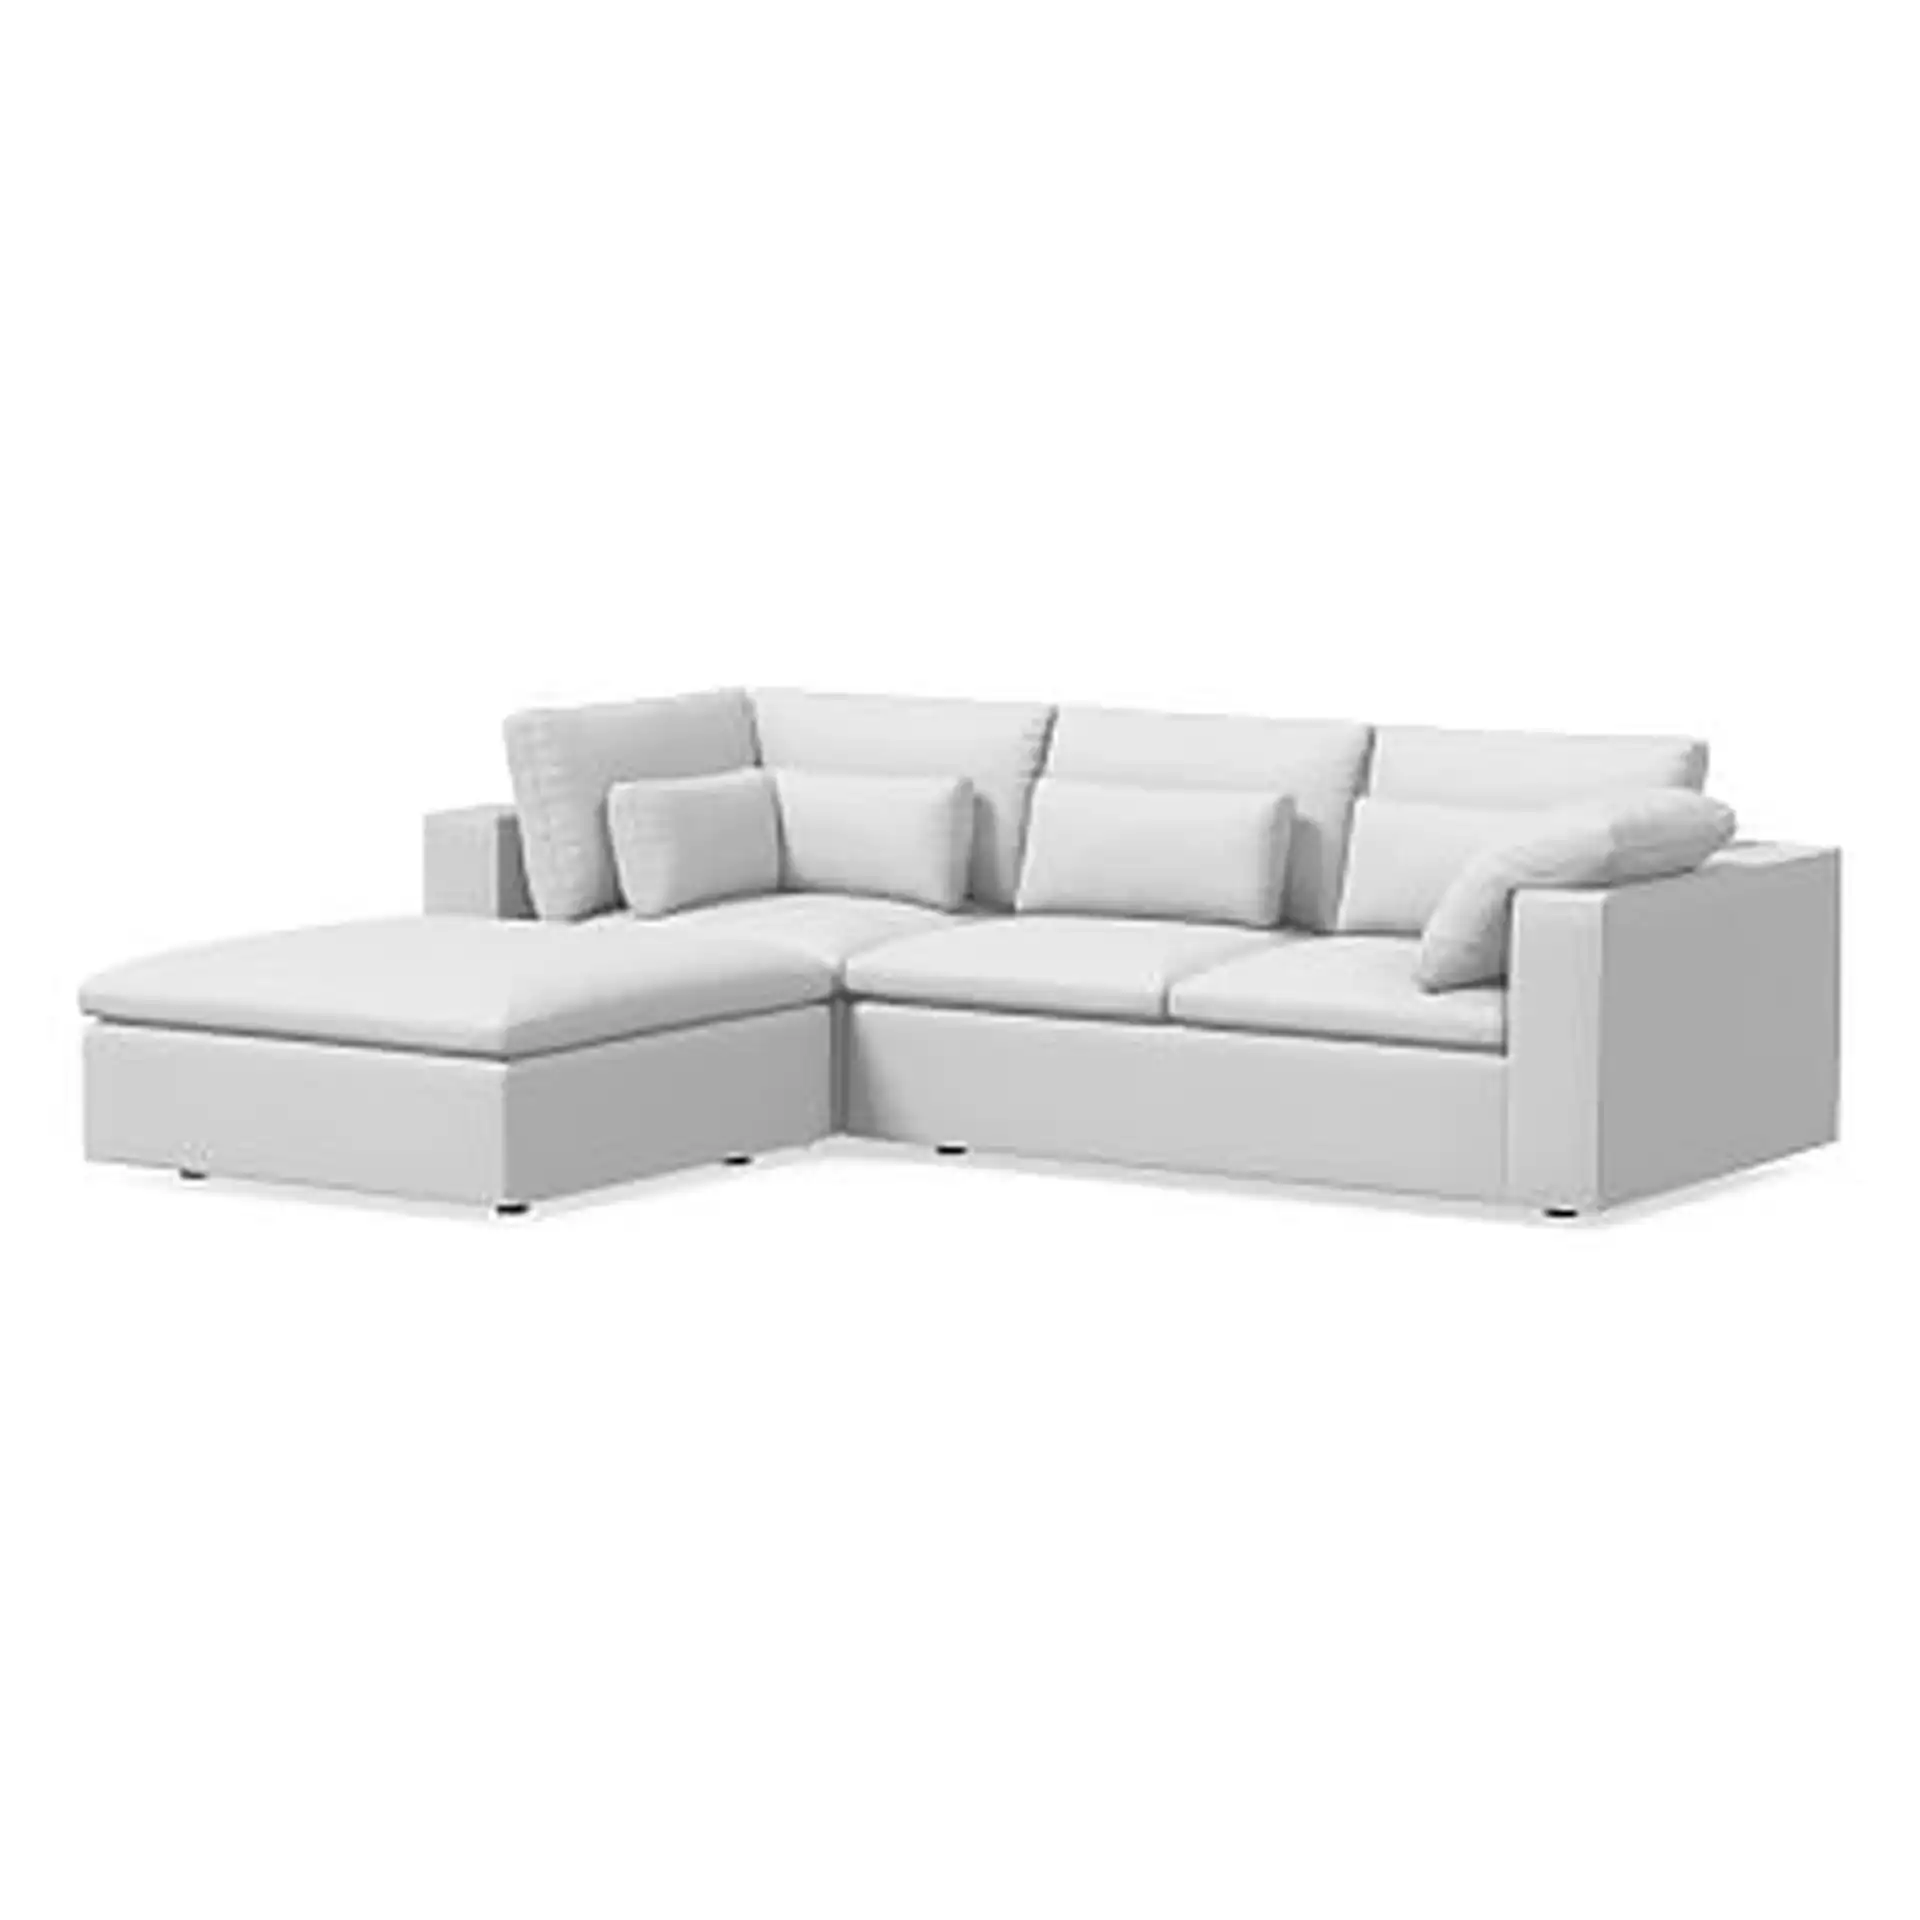 Harmony Modular Sectional Set 02: Right Arm Sofa + Corner + Ottoman, Down, Performance Washed Canvas, White, Concealed Supports